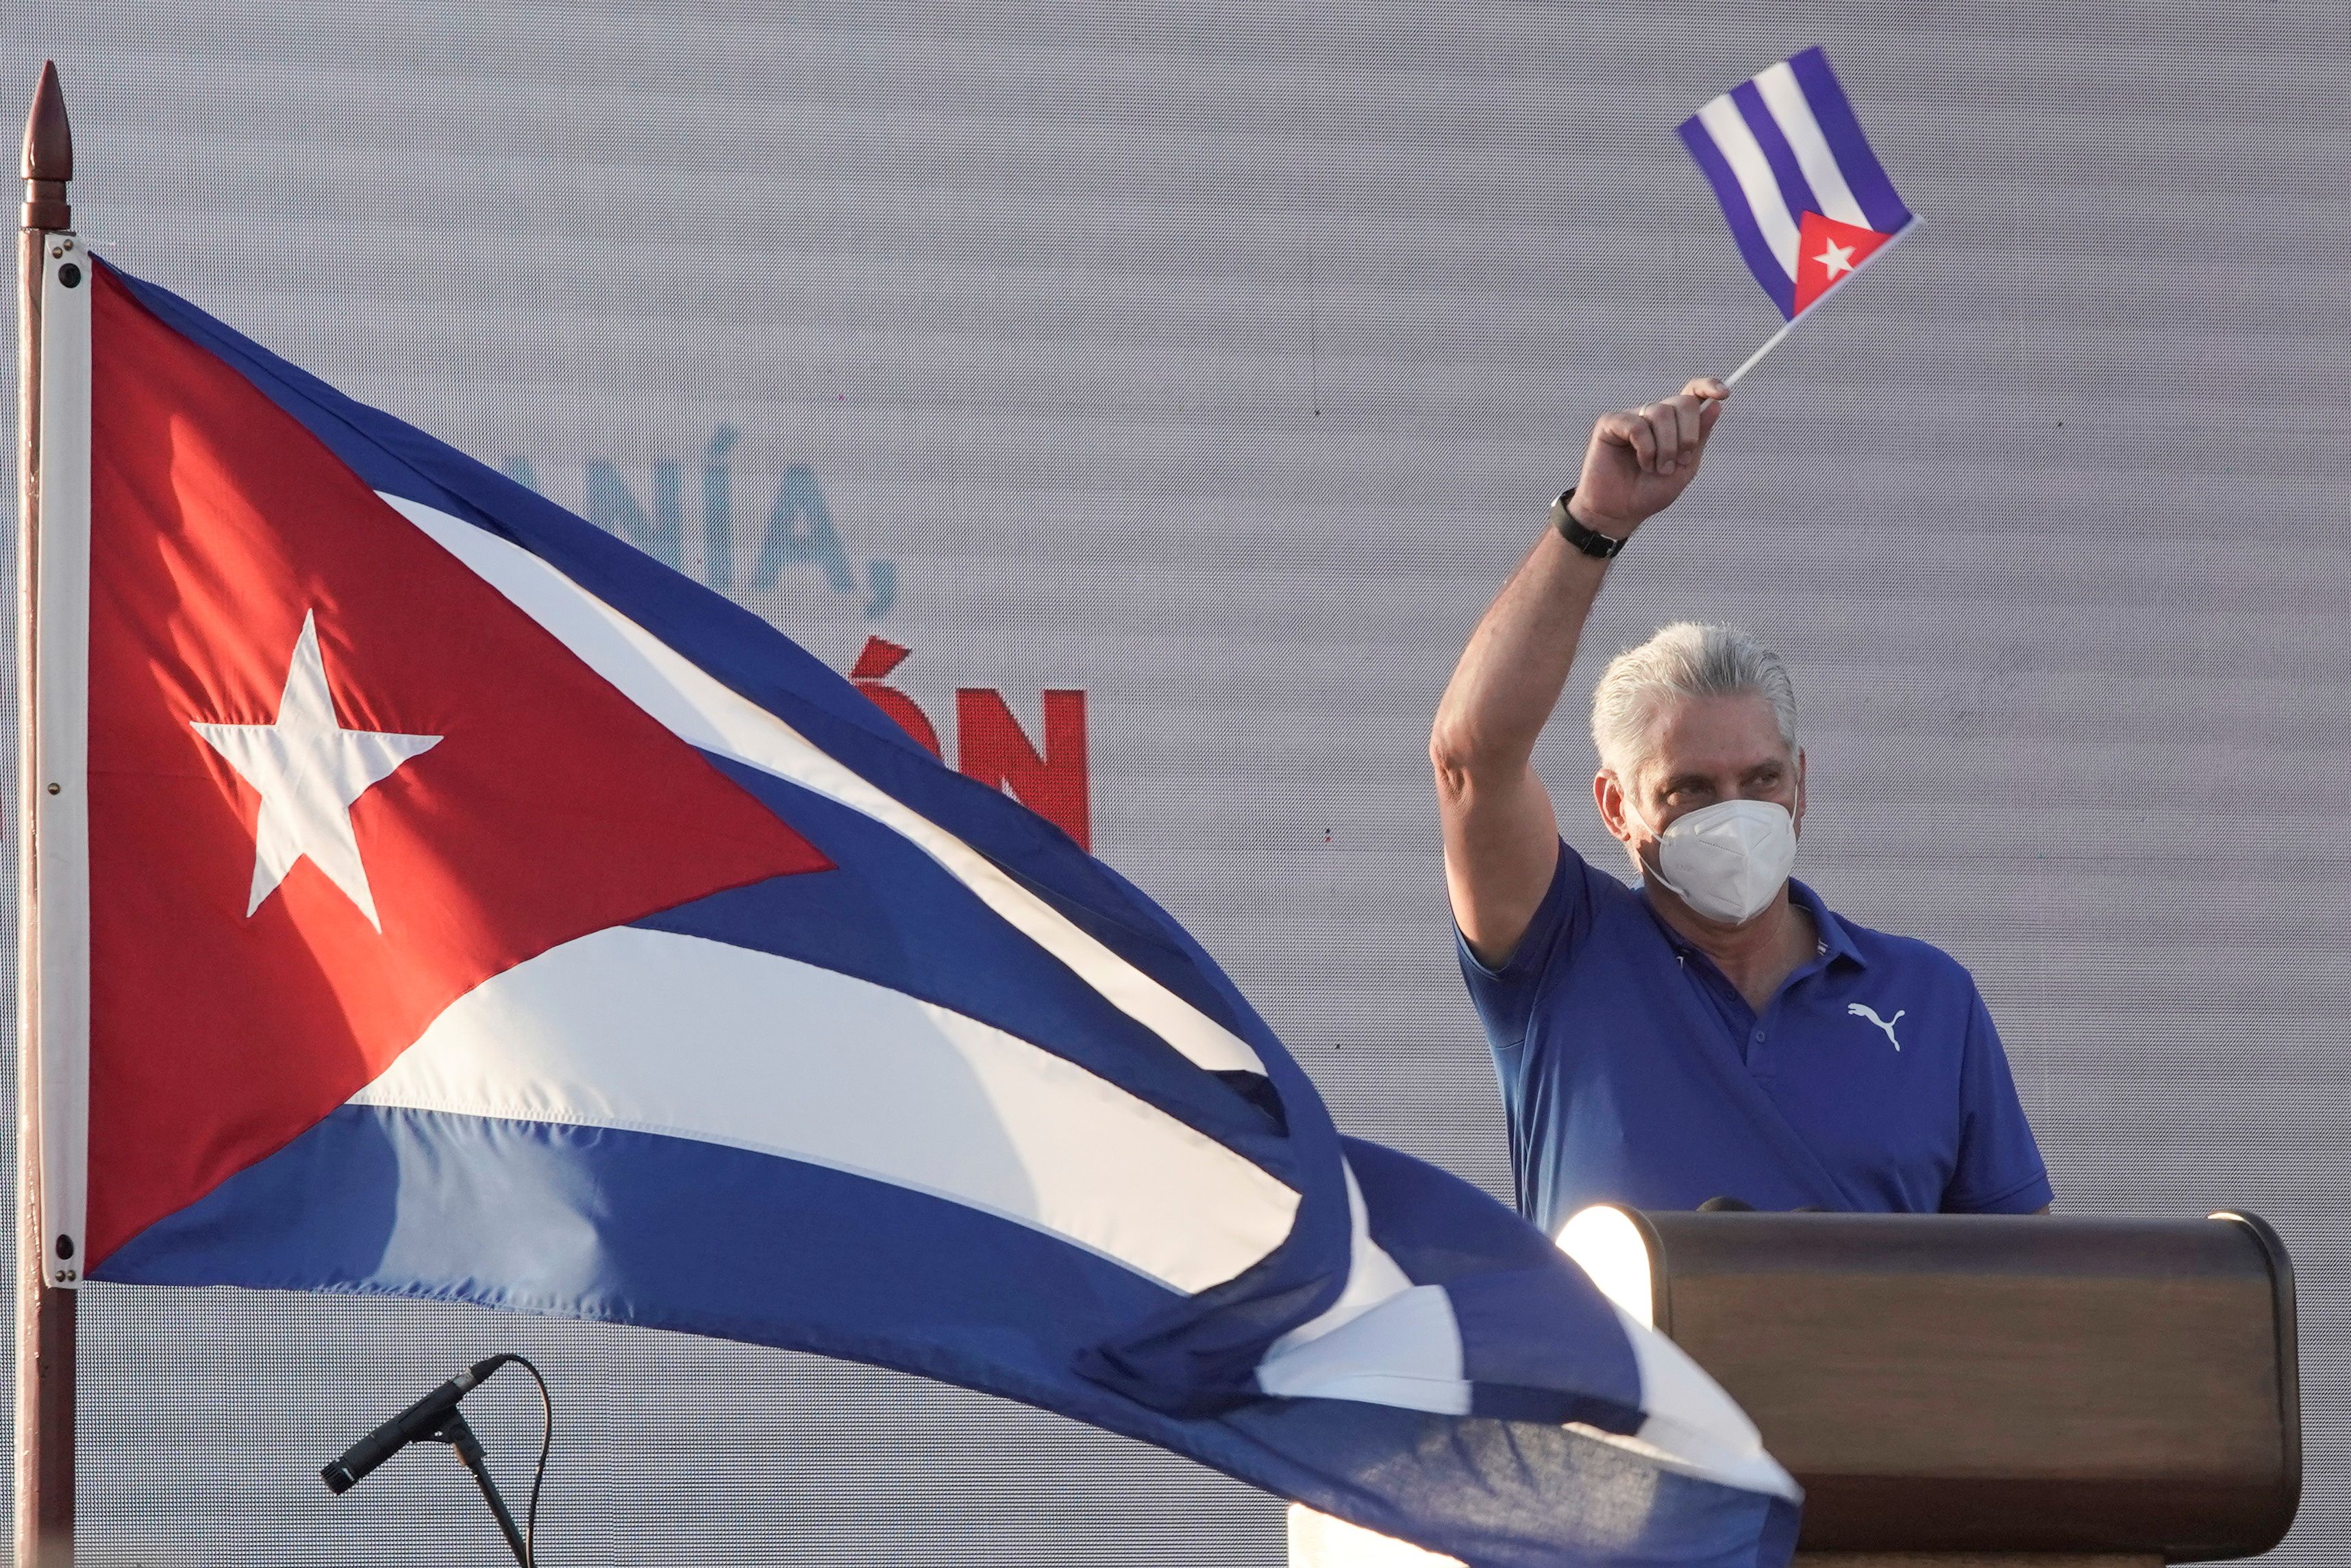 Cuba's President and First Secretary of the Communist Party Miguel Diaz-Canel waves a Cuban national flag as he delivers a speech during a rally in Havana, Cuba, July 17, 2021. REUTERS/Alexandre Meneghini